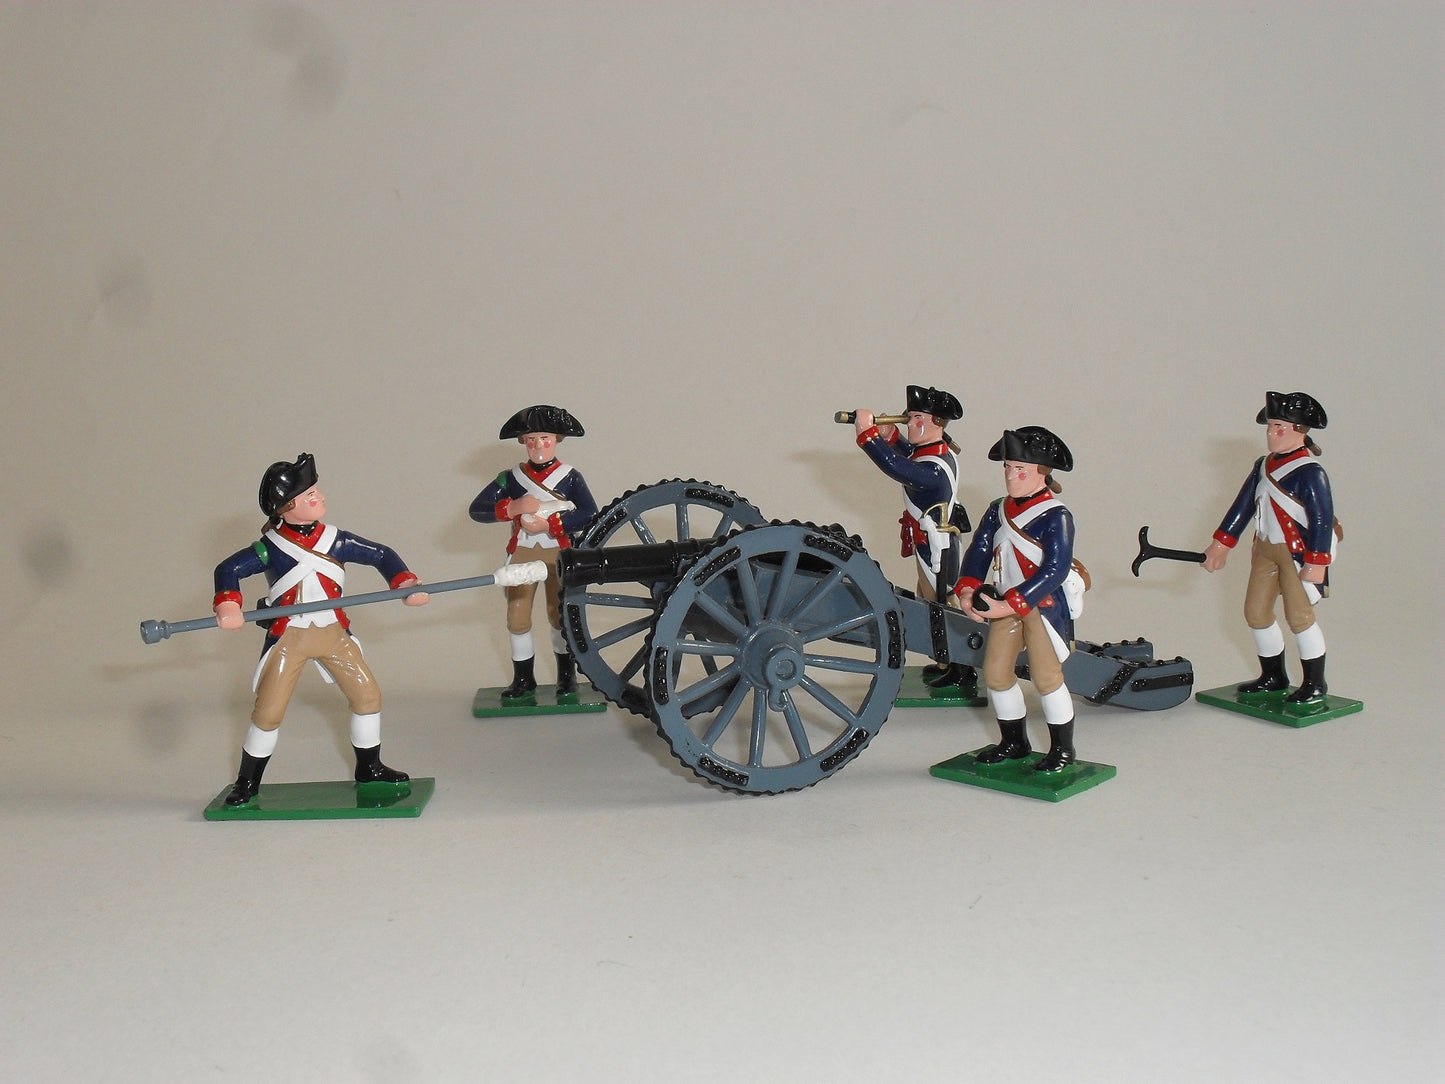 Collectible toy soldier miniature set Colonel Knox's Artillery Regiment 1775. Five soldiers in blue and brown uniforms with a cannon.